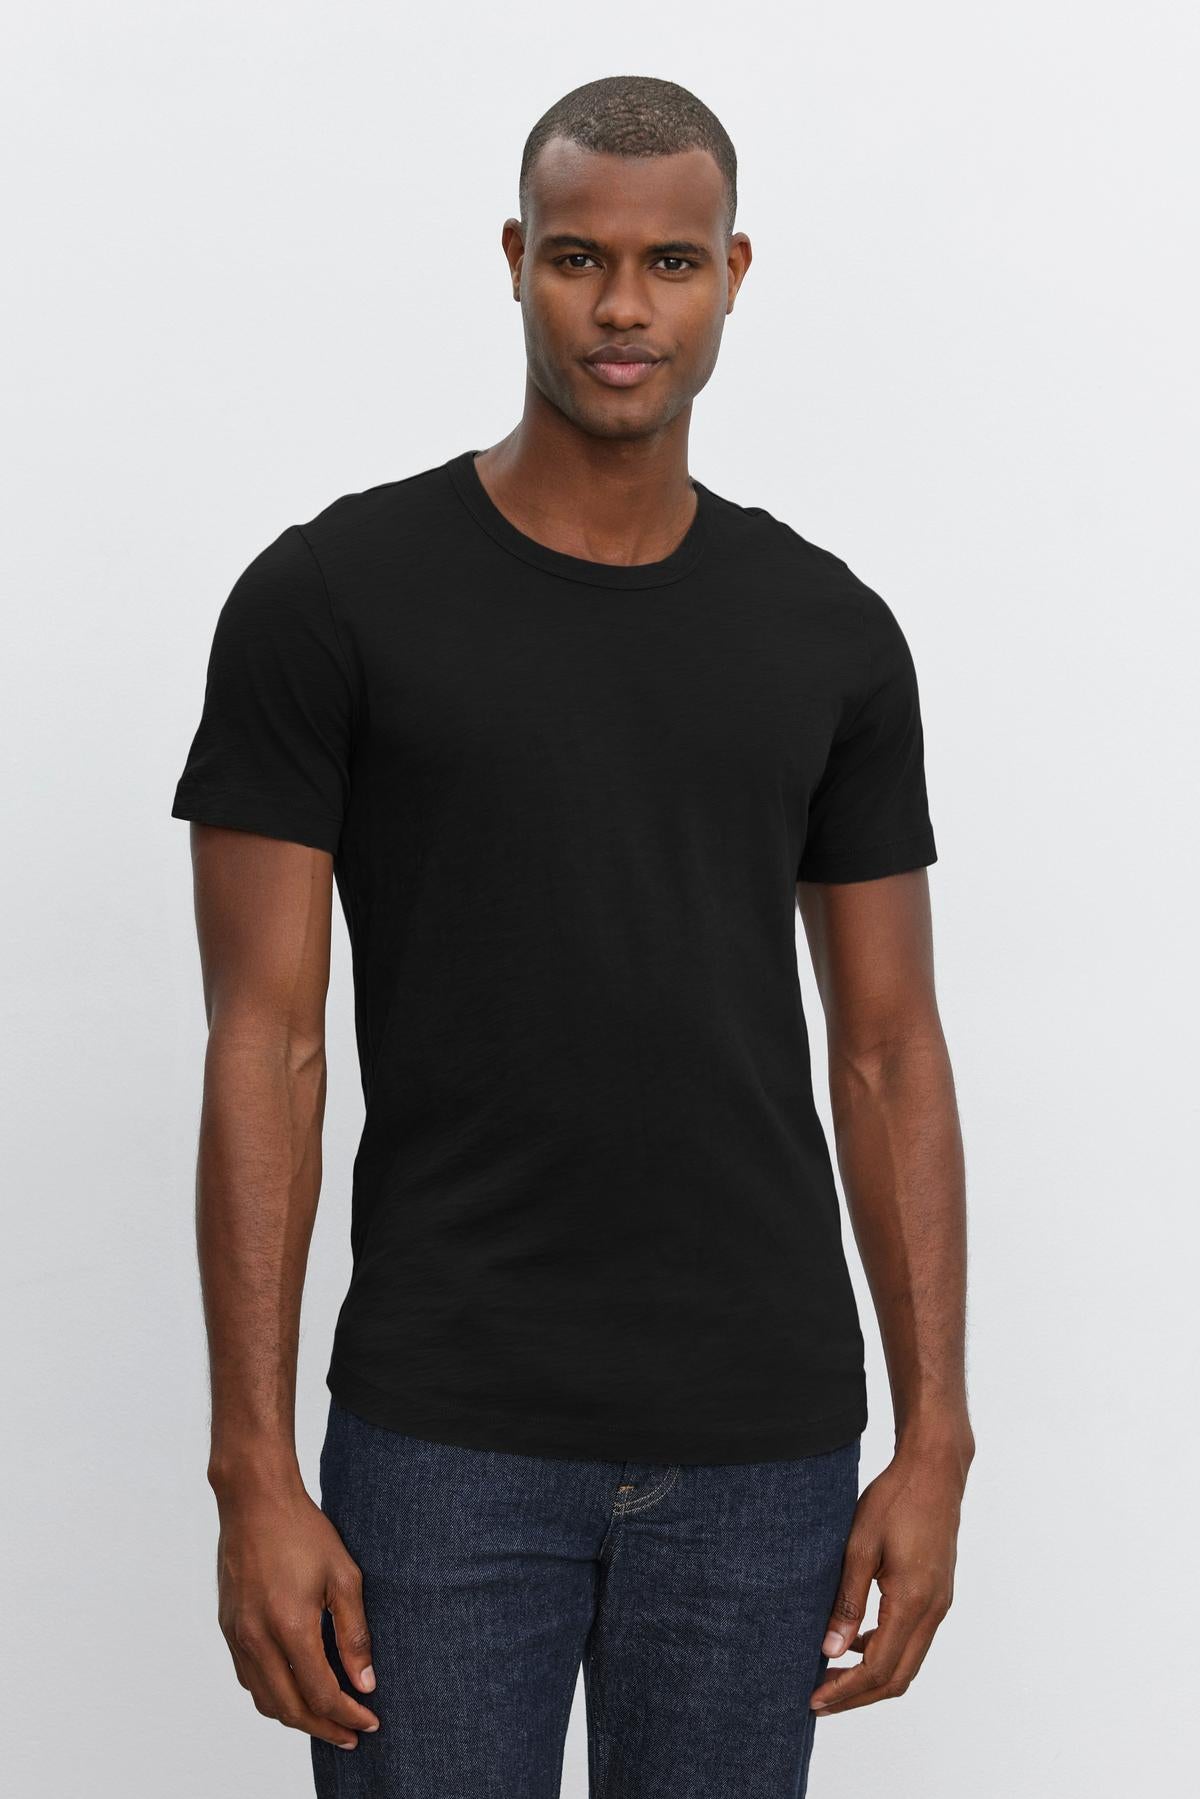   A man wearing a black Velvet by Graham & Spencer crew neck AMARO TEE and blue jeans standing against a white background. 